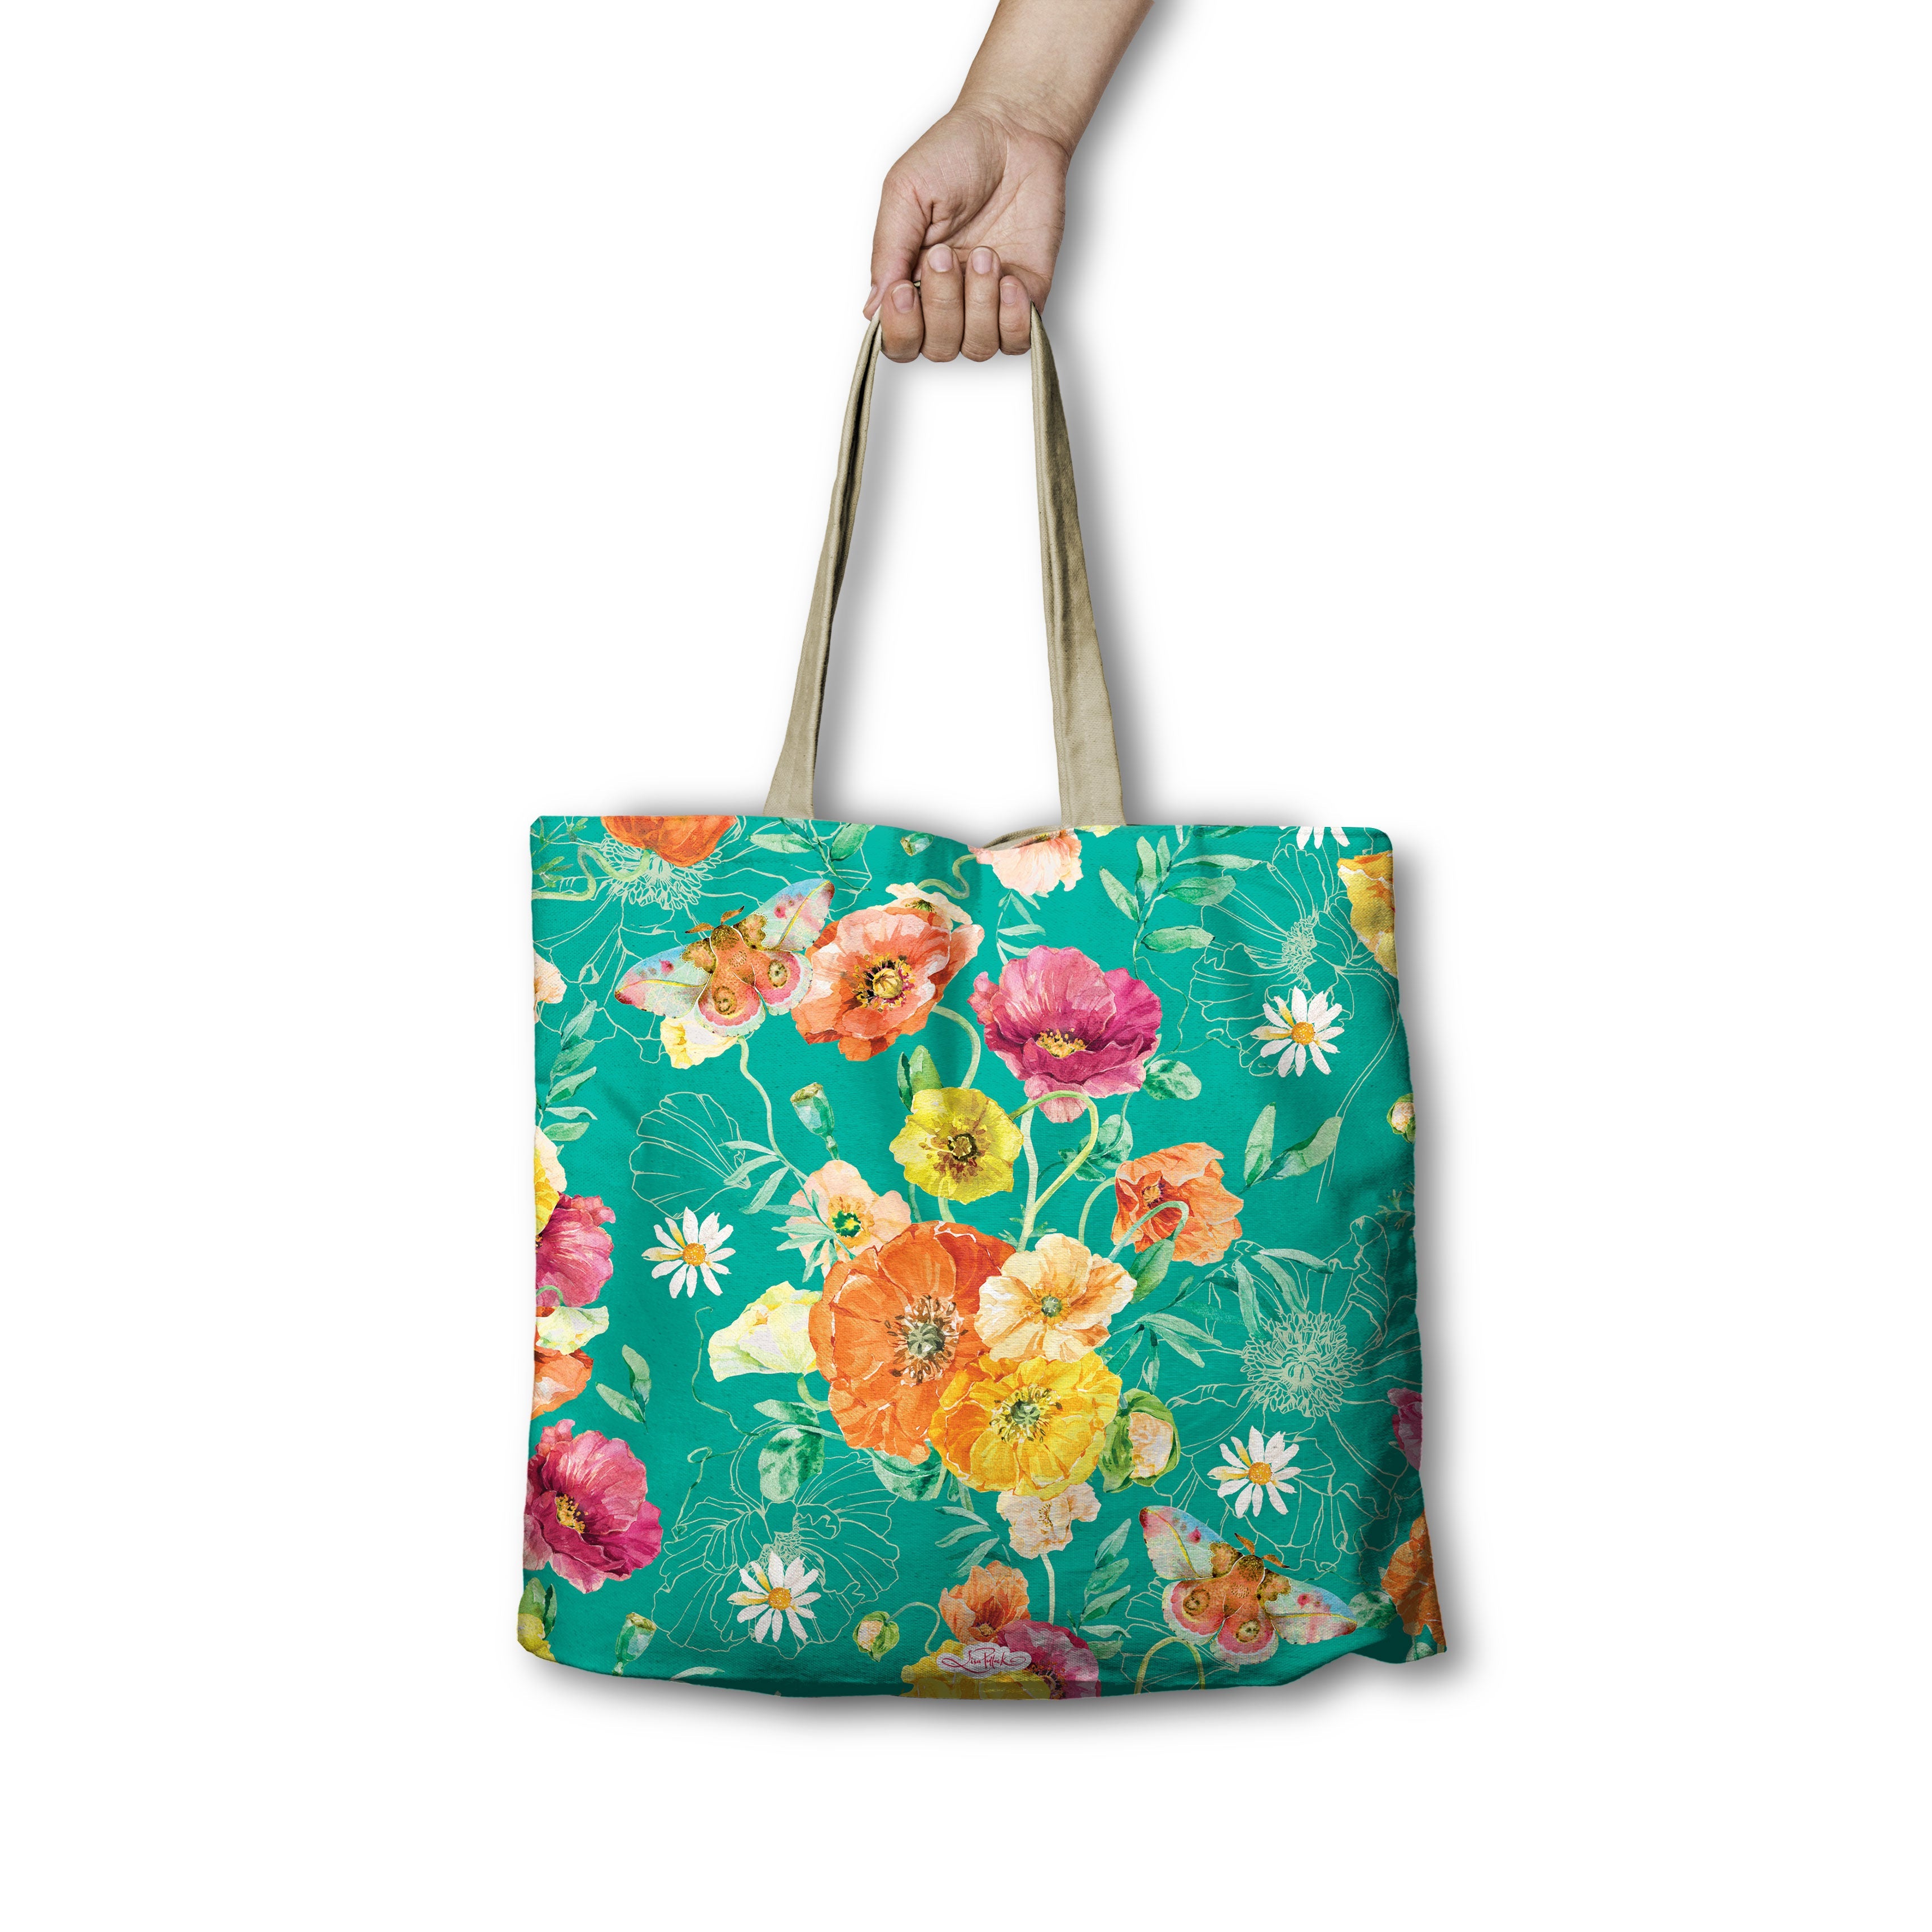 Shopping Tote - Bright Poppies